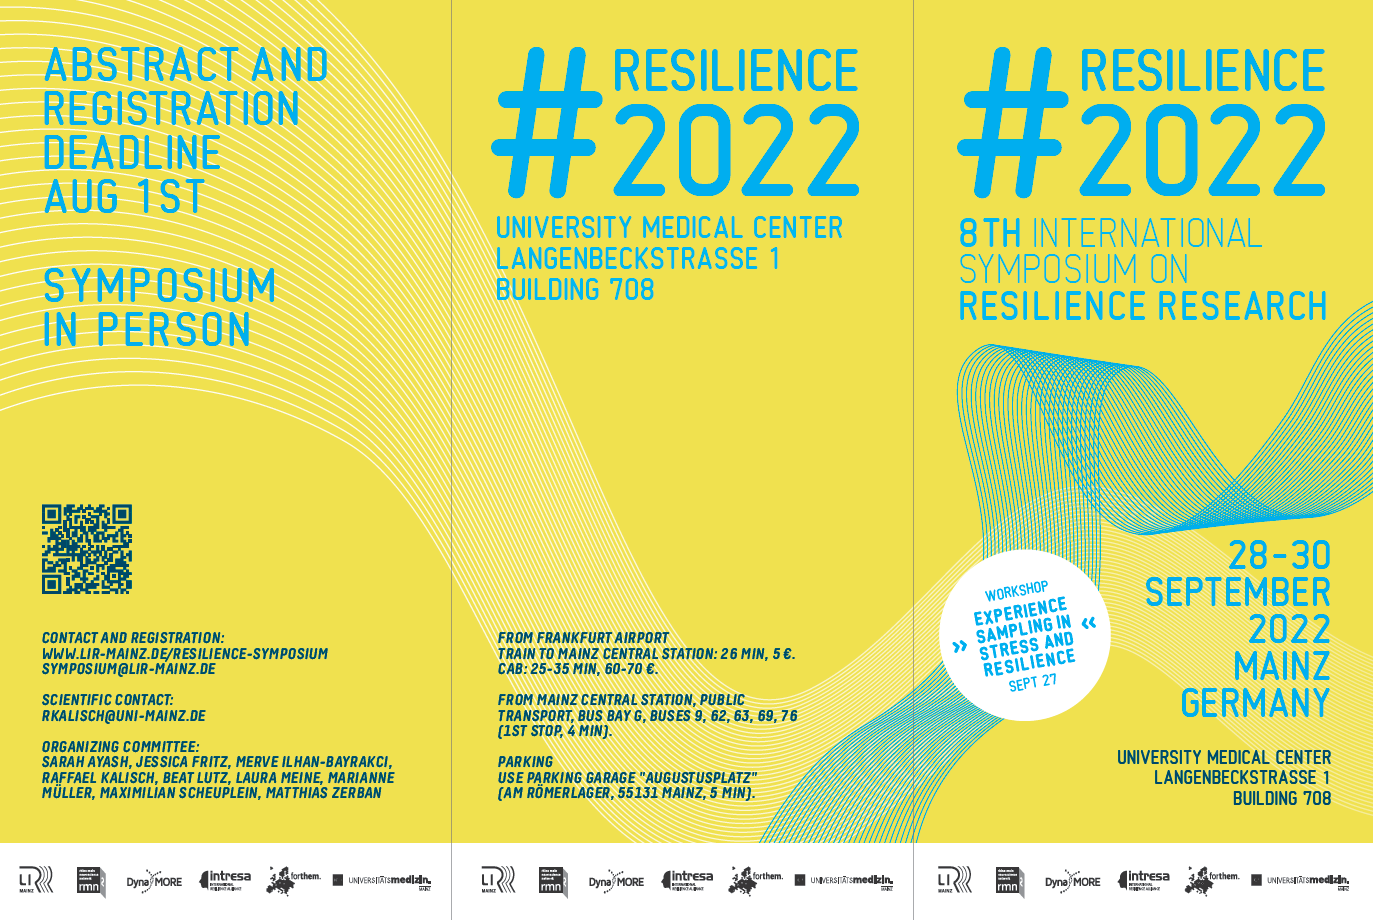 International Symposium on Resilience Research